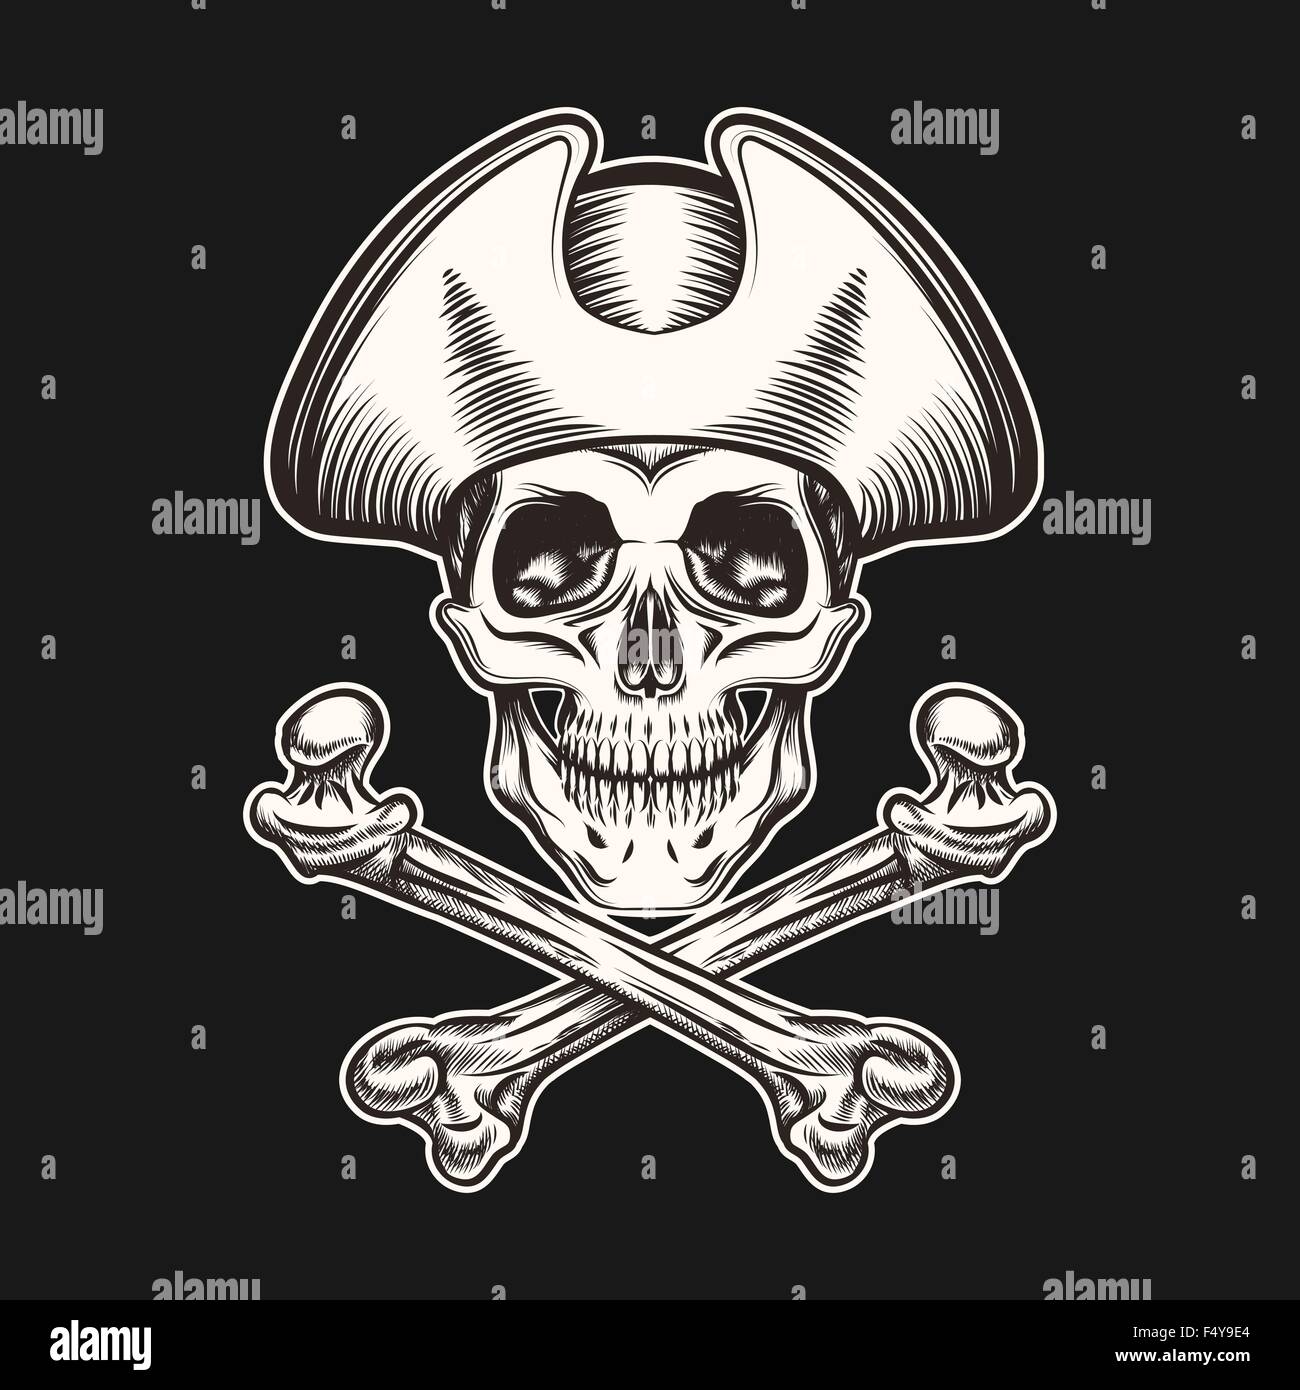 Skull in pirate hat and crossbones.Illustration in Tattoo style. Isolated on Black. Stock Vector